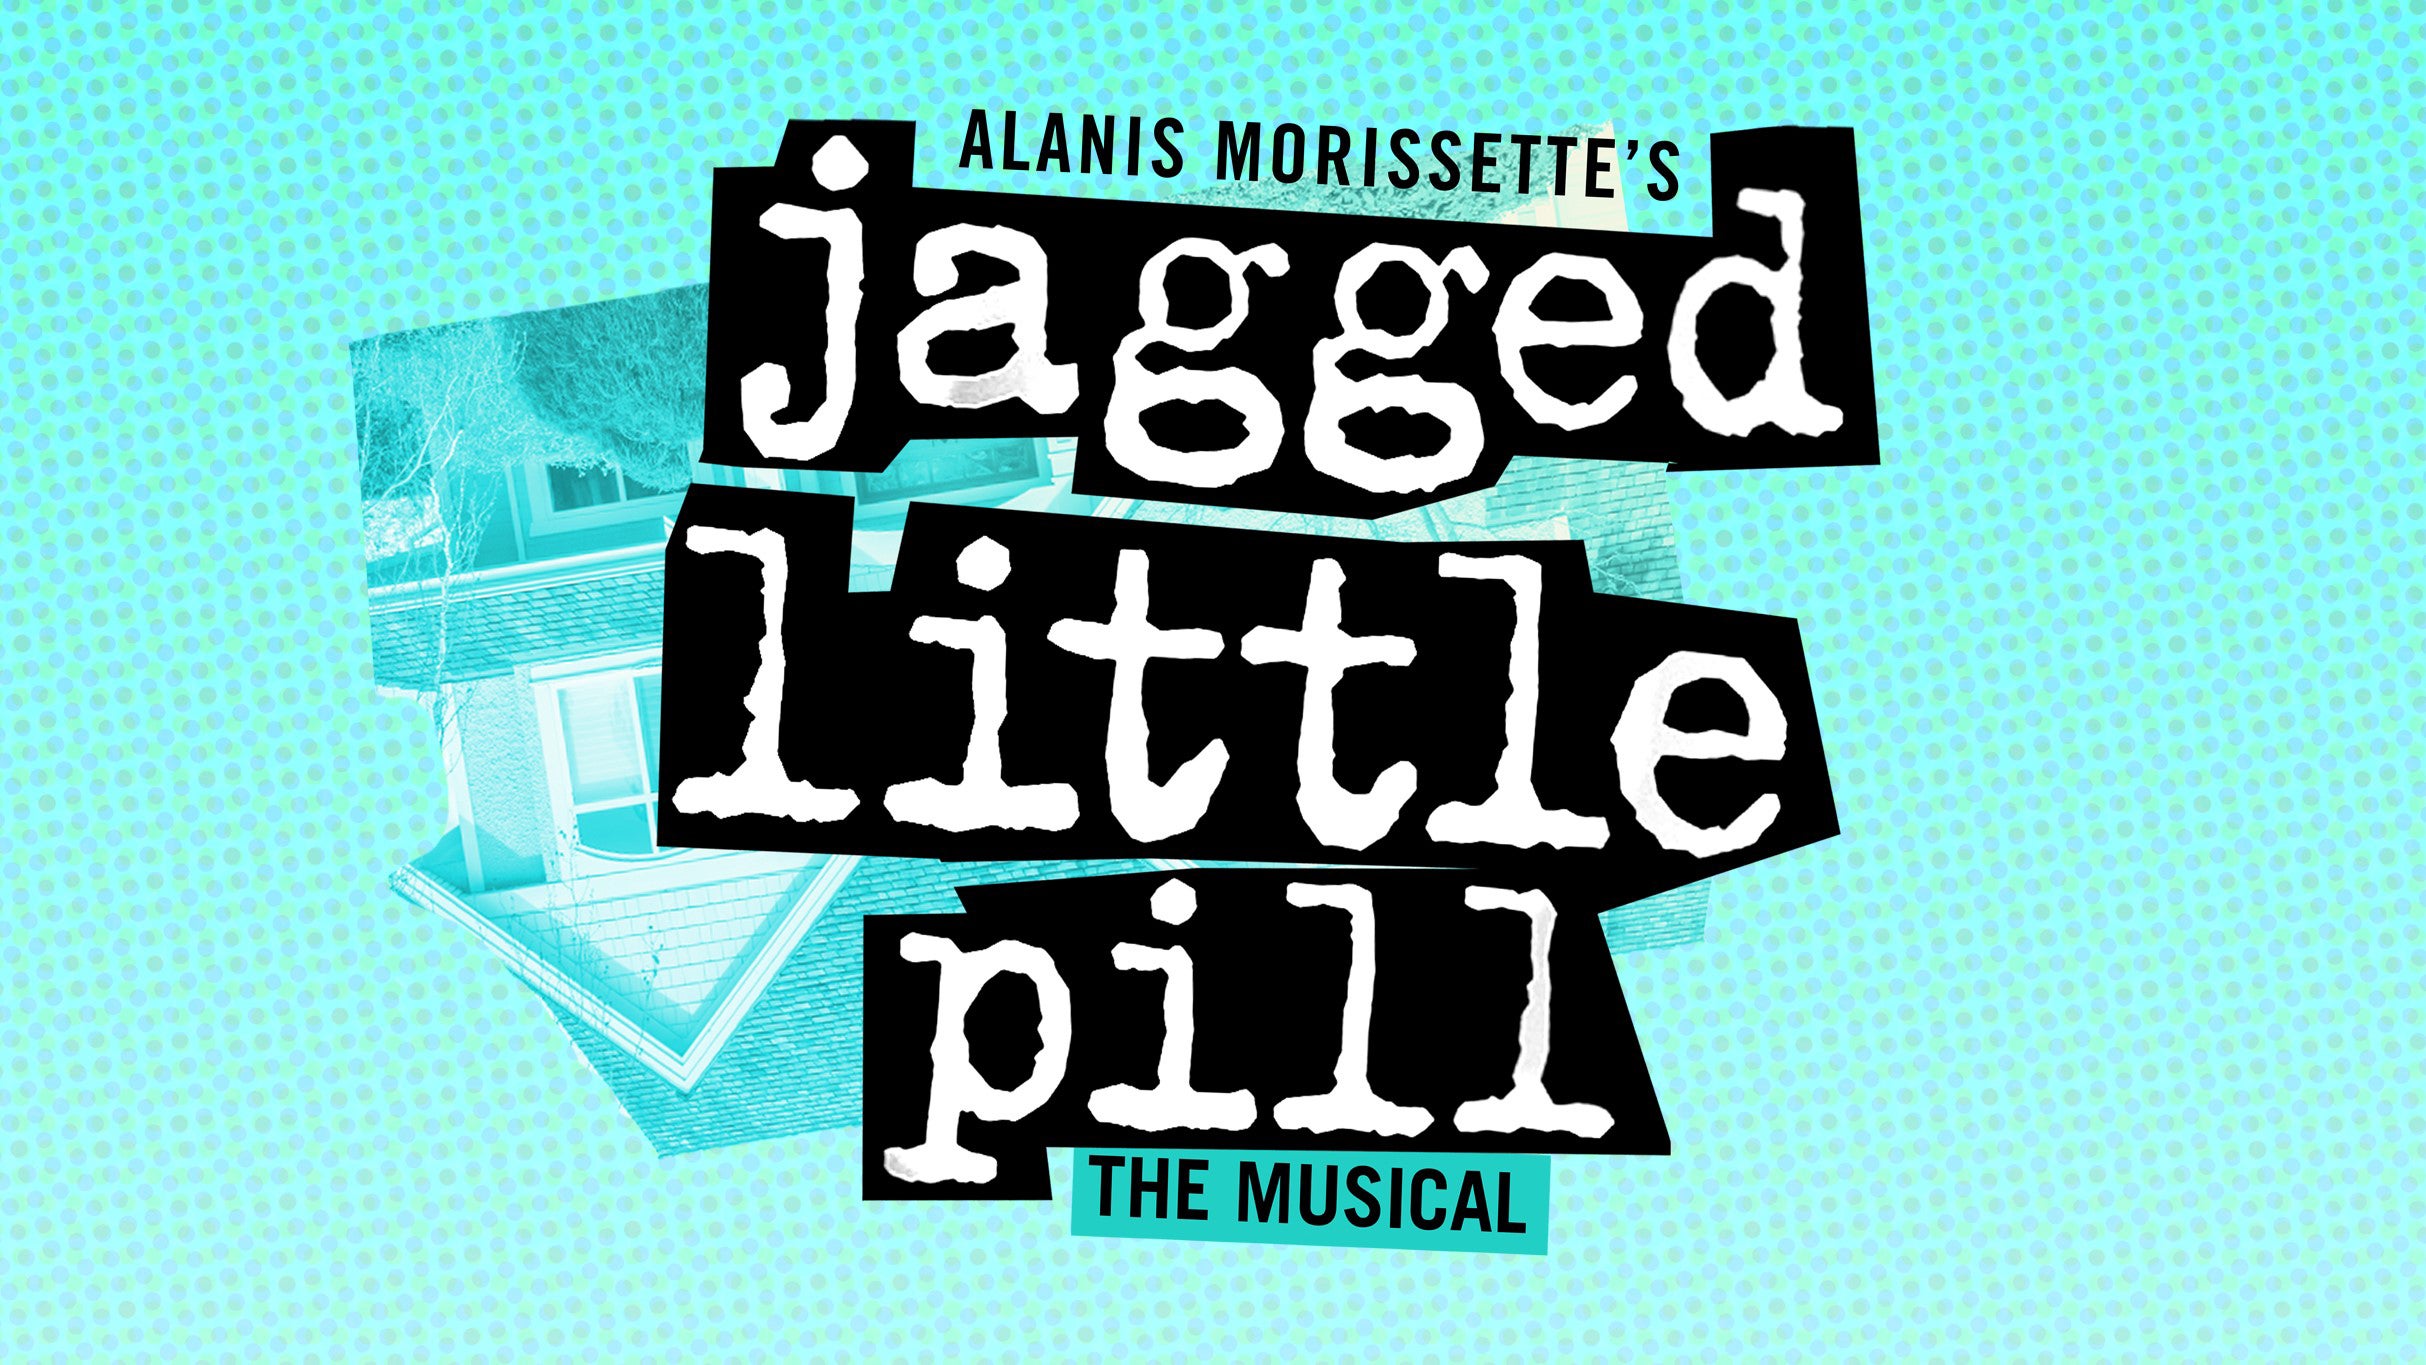 Jagged Little Pill (Touring) in Chattanooga promo photo for Newsletter presale offer code